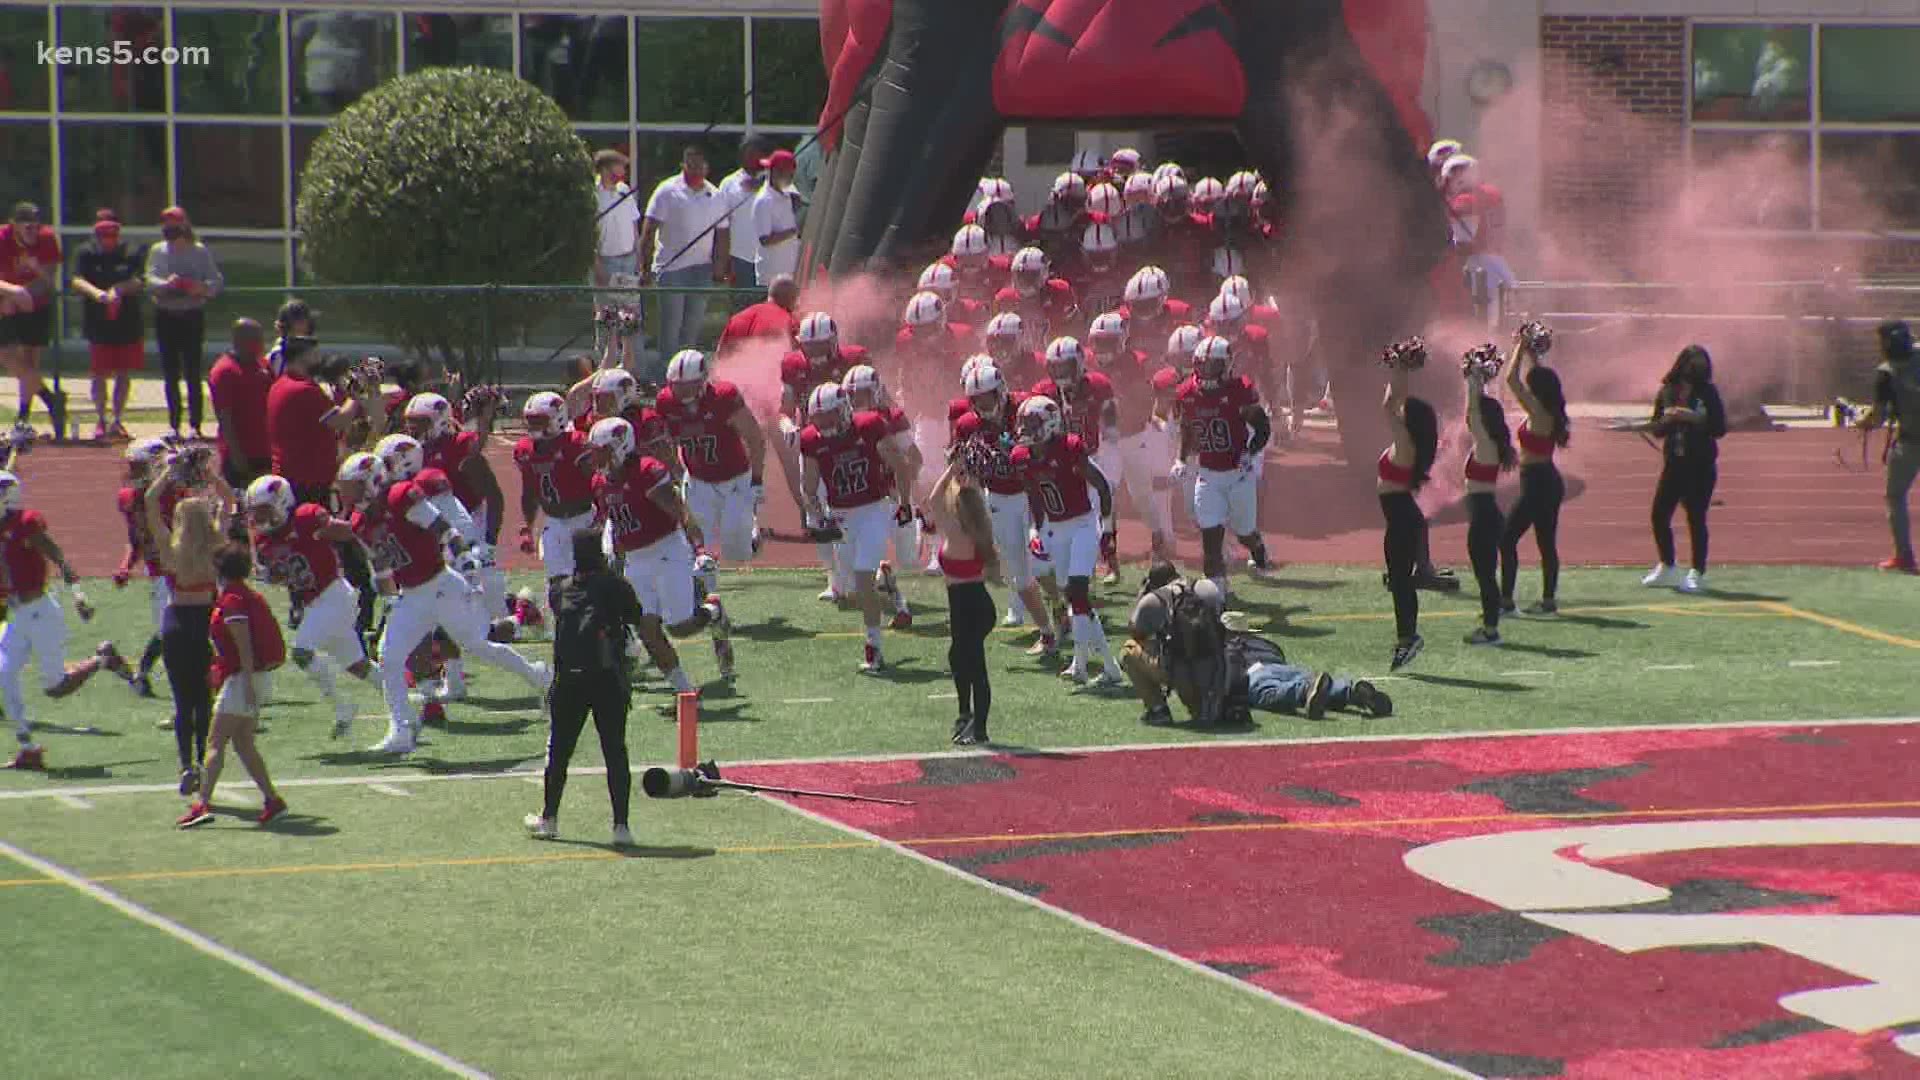 The Cardinals improved to 3-0 in their abbreviated spring season, defeating Southeastern Louisiana 56-45.